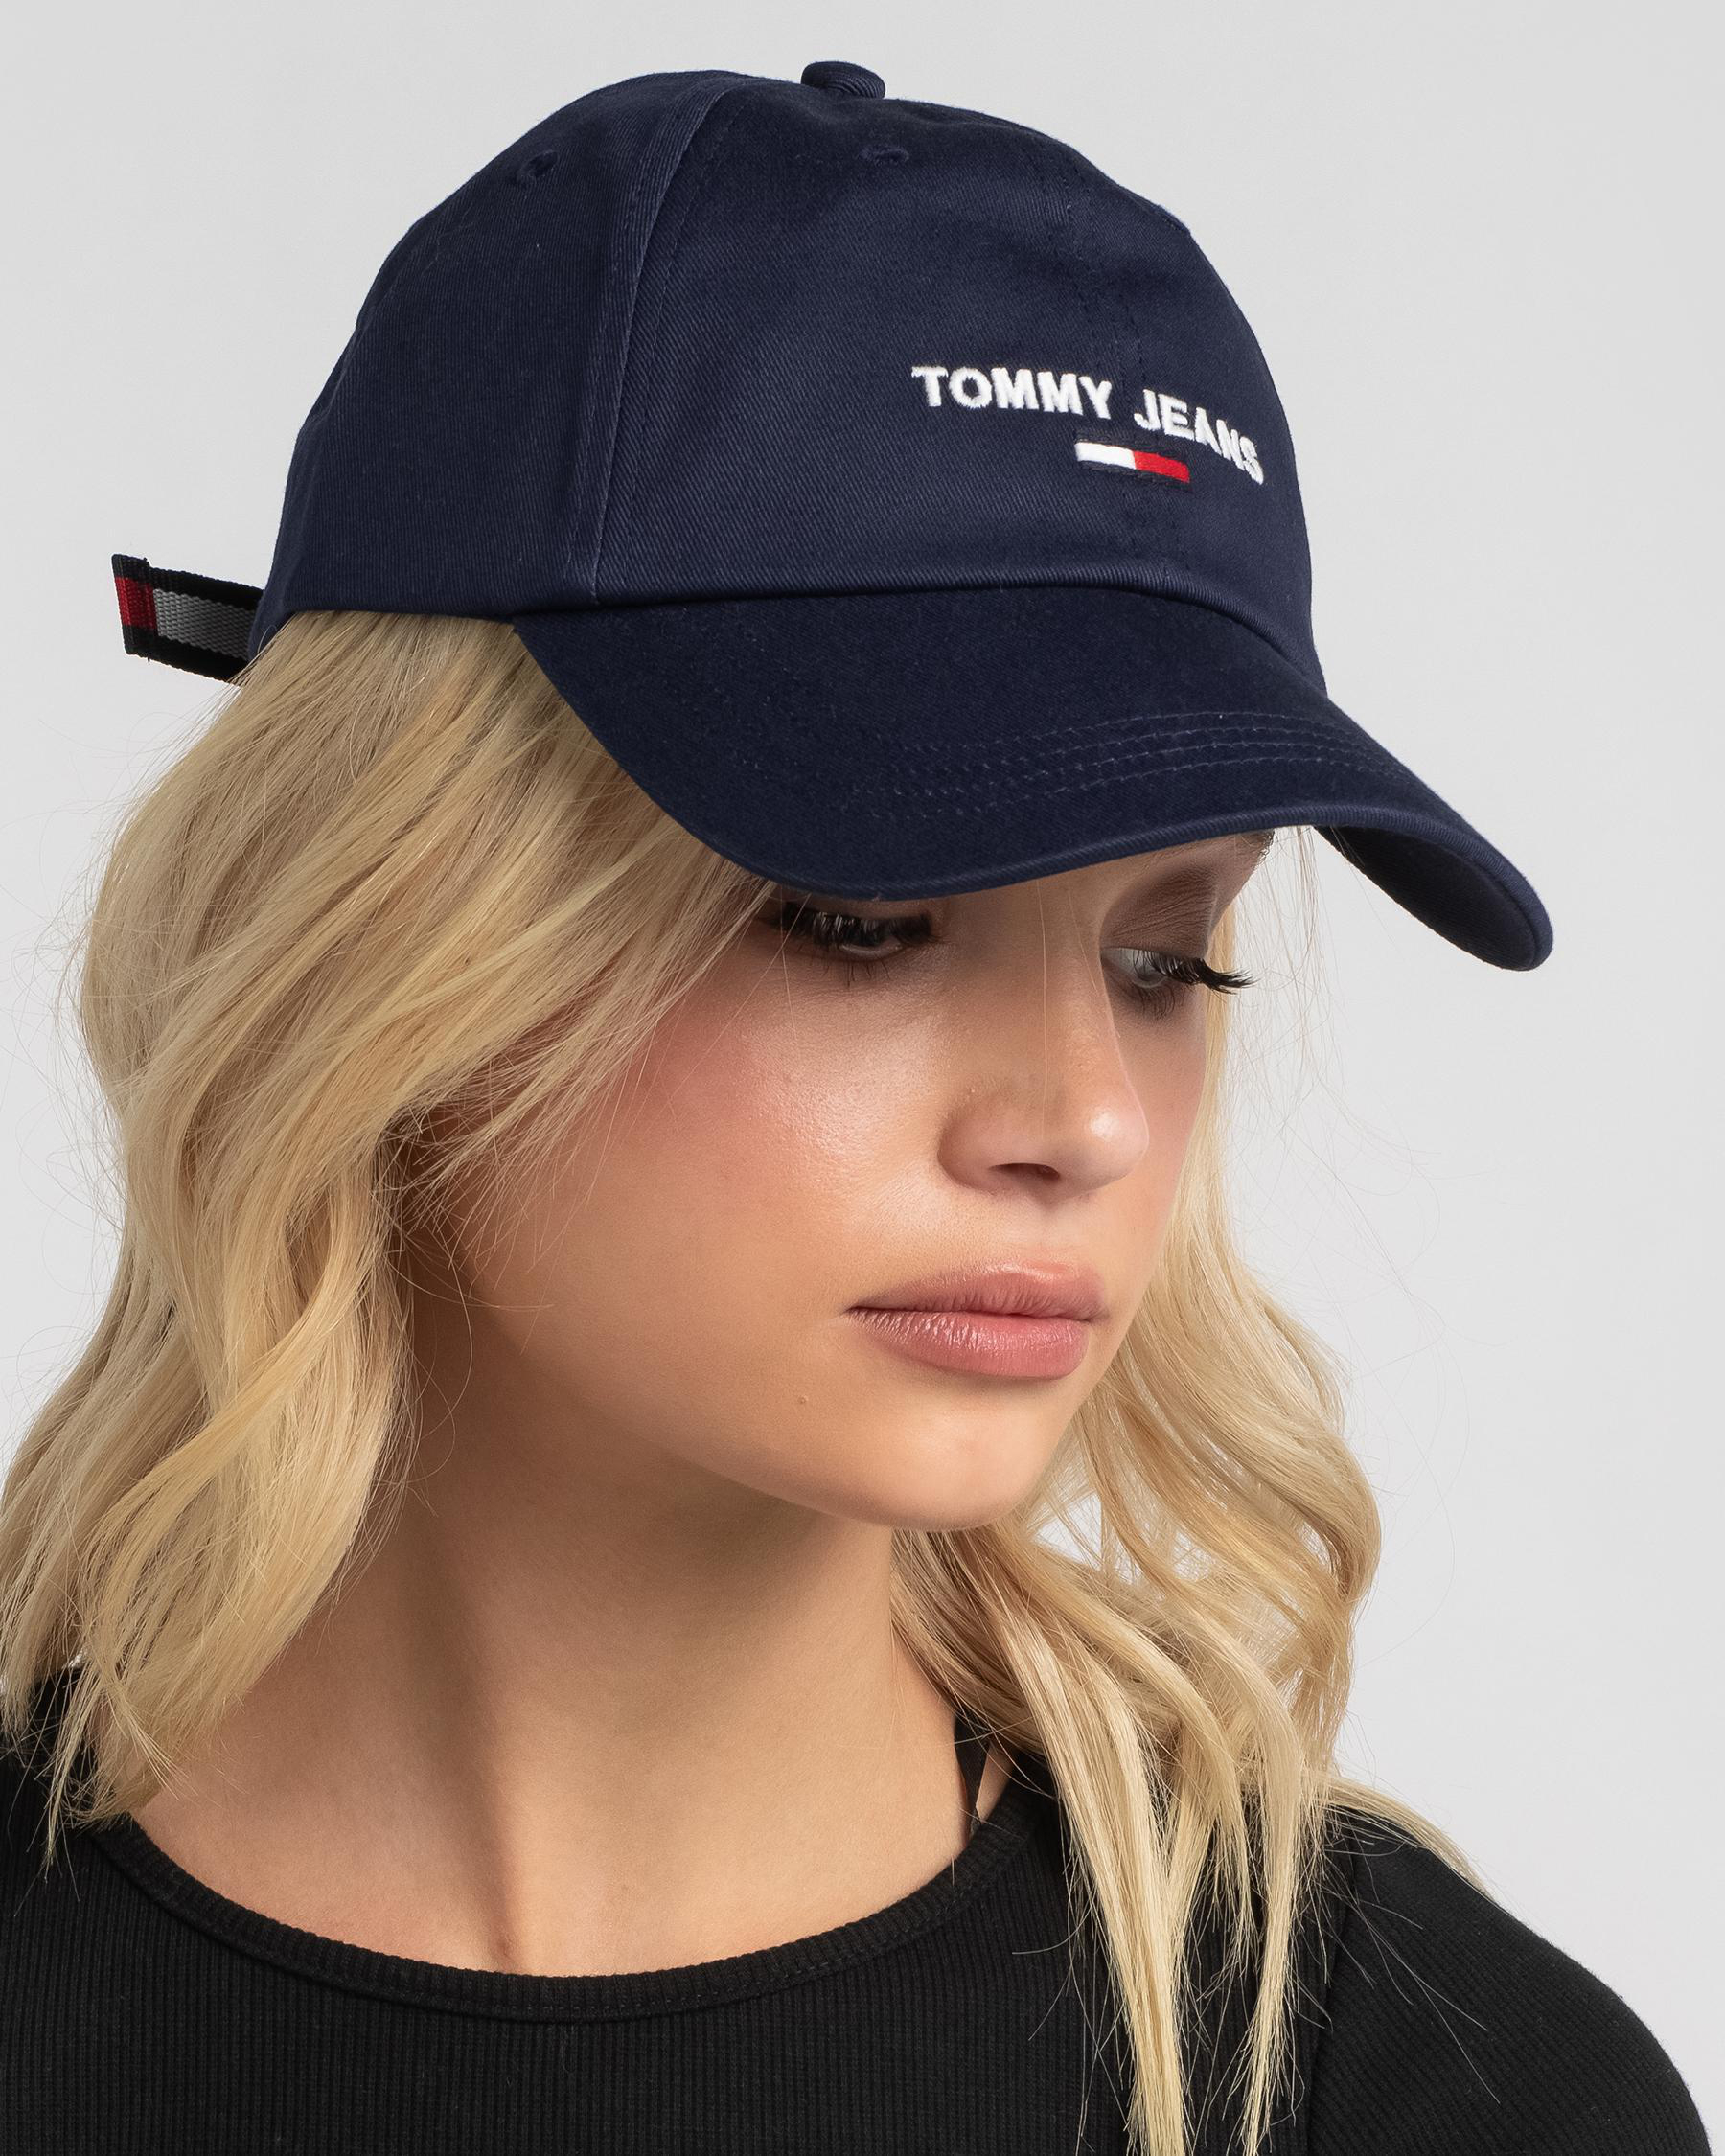 Tommy Hilfiger Sport - Twilight United Navy City Cap Shipping Beach States In Returns FREE* & Easy 